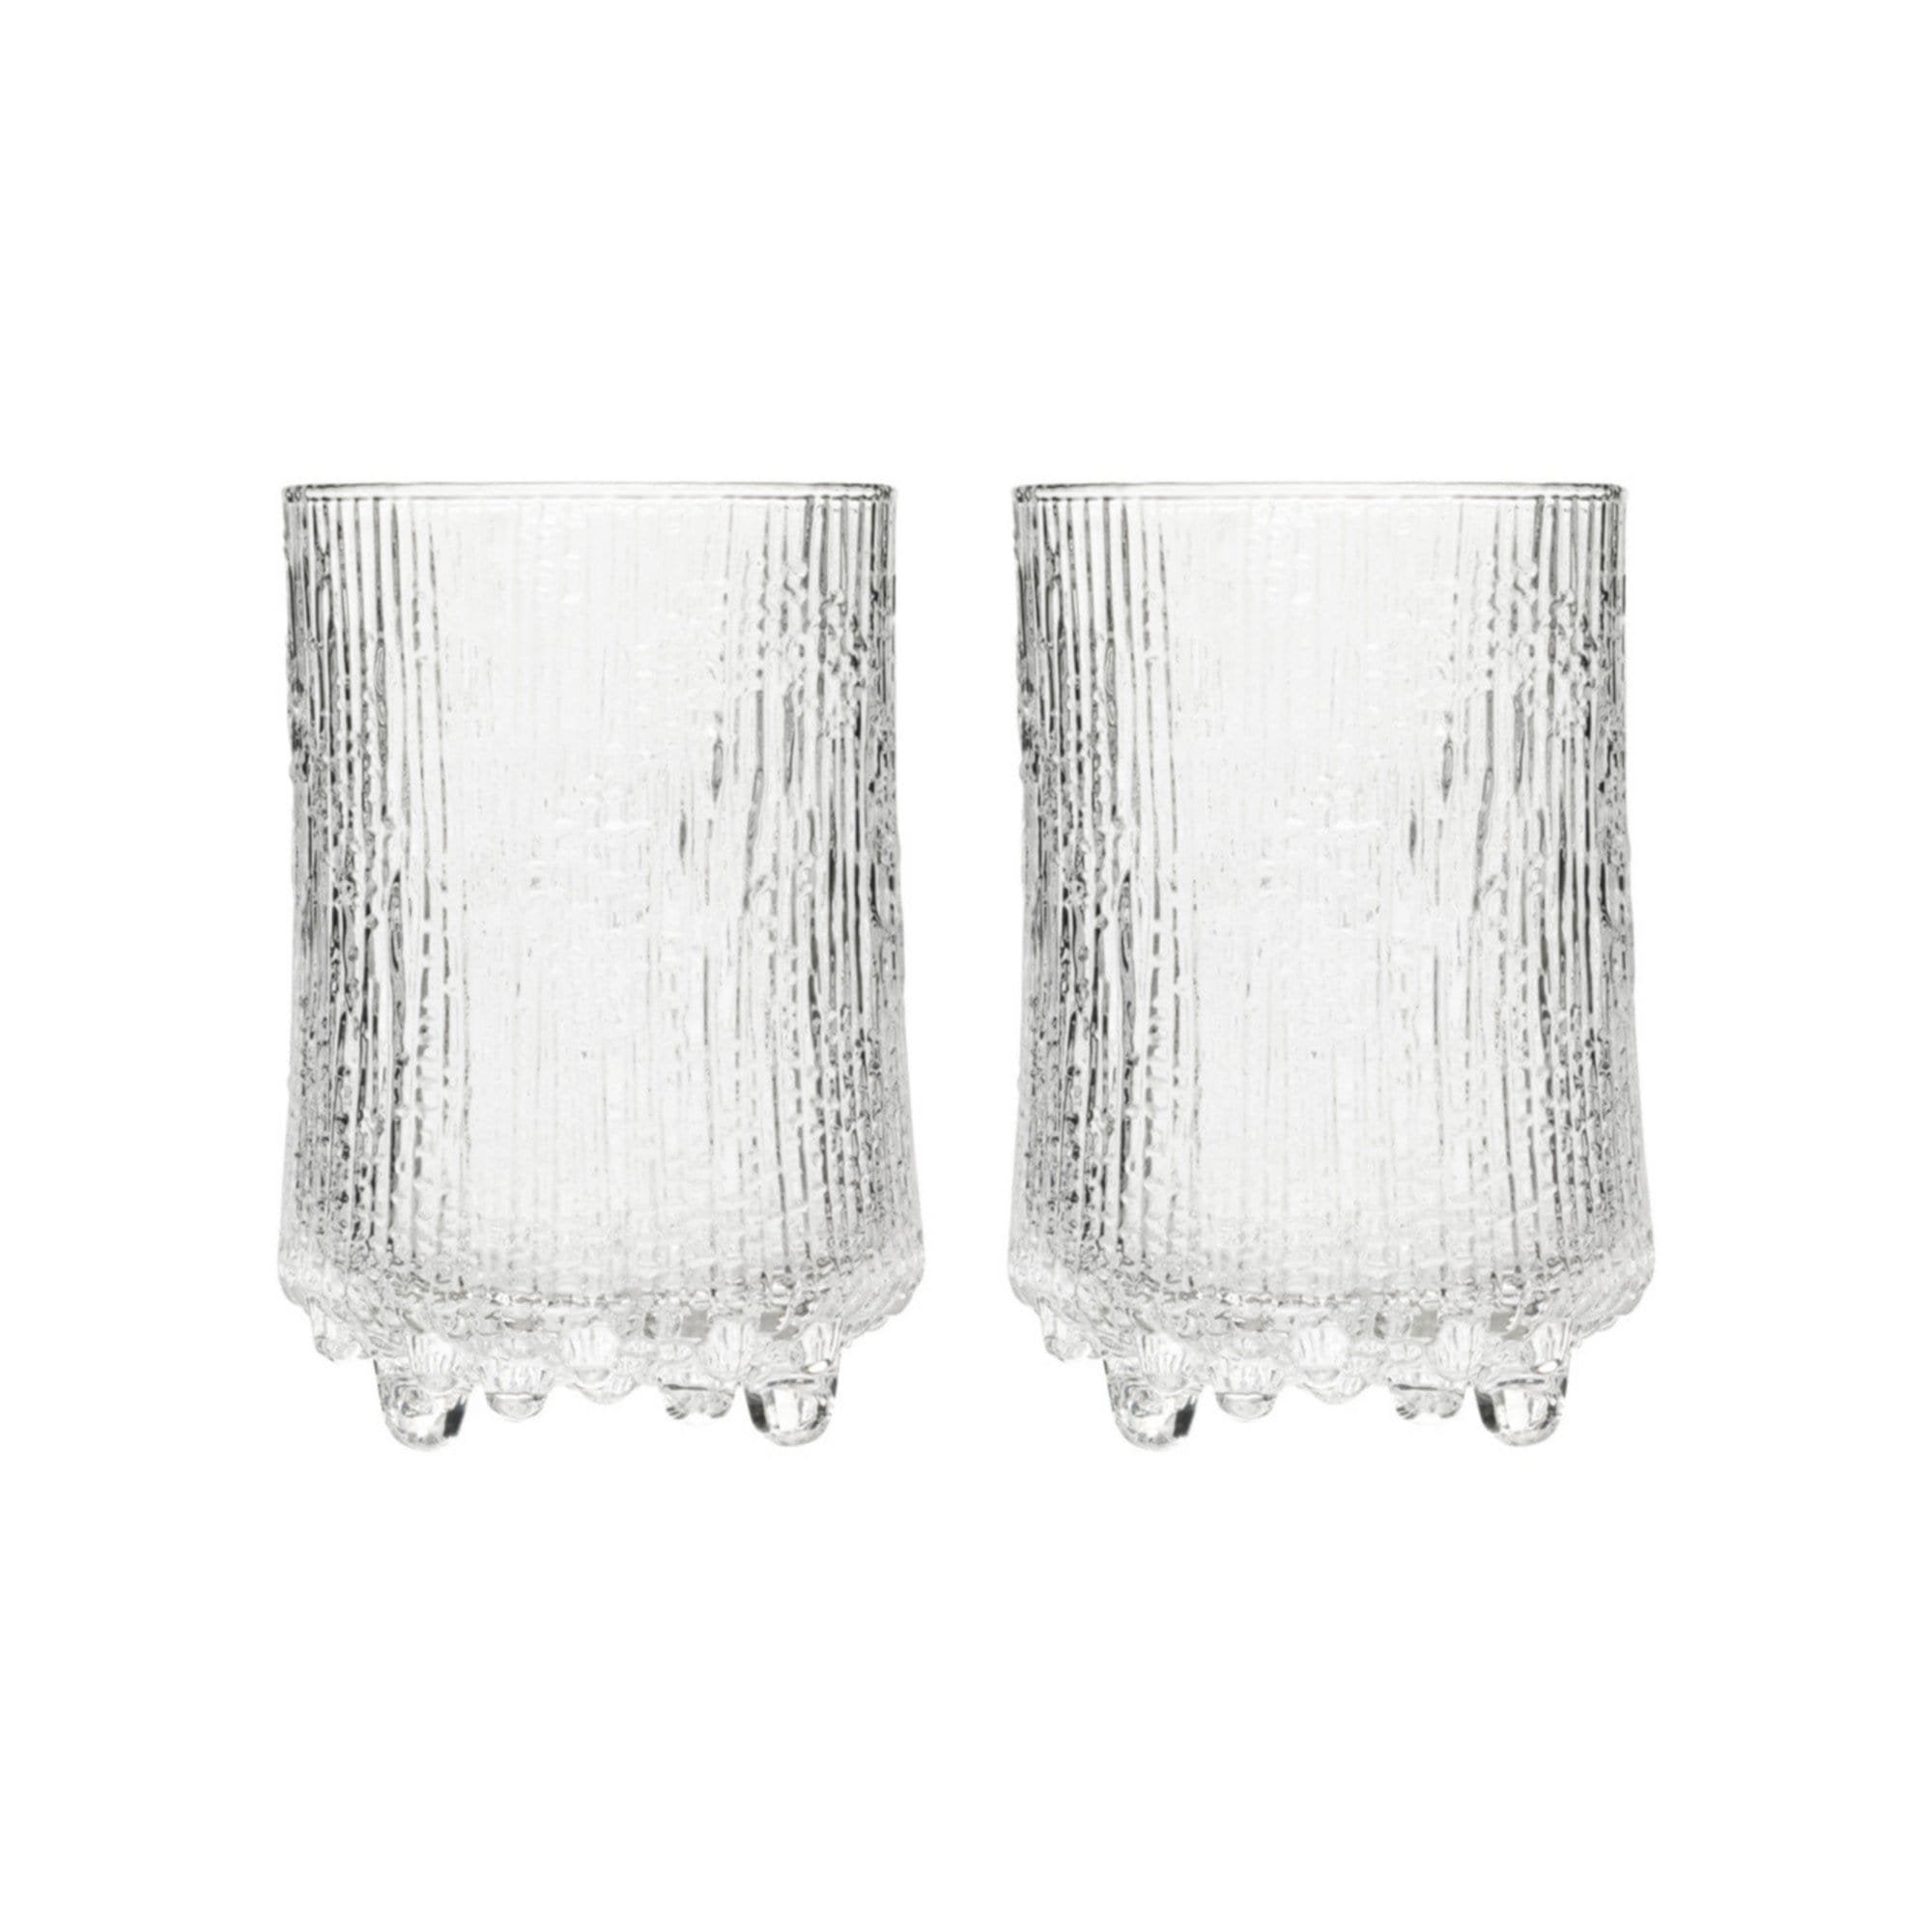 Ultima Thule Footed Highball Glass | Set of 2